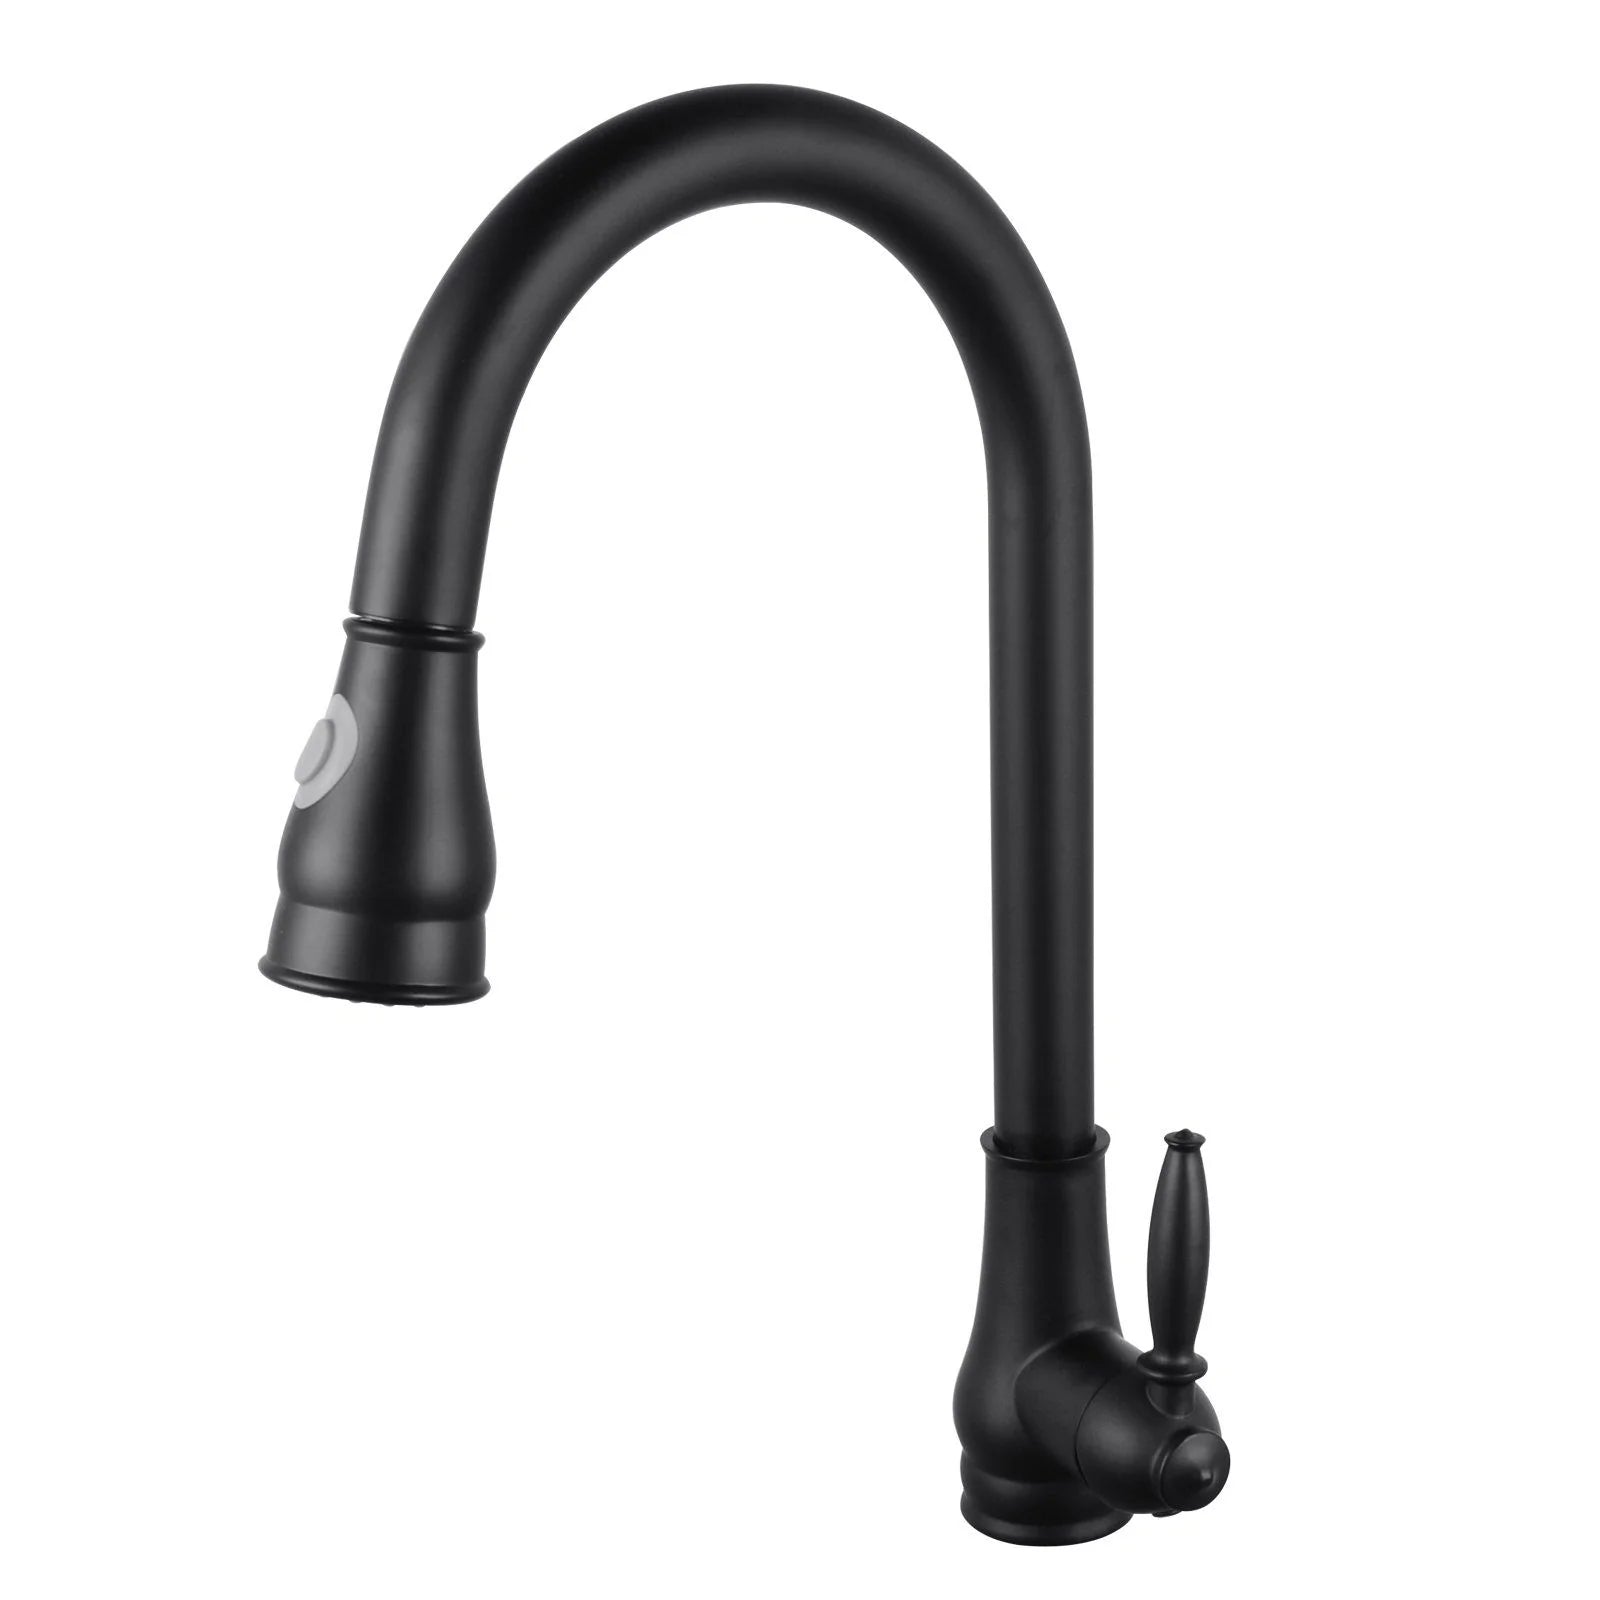 Round Vintage Pull Out Kitchen Sink Mixer Tap: Classic design with modern functionality-OX1018.KM